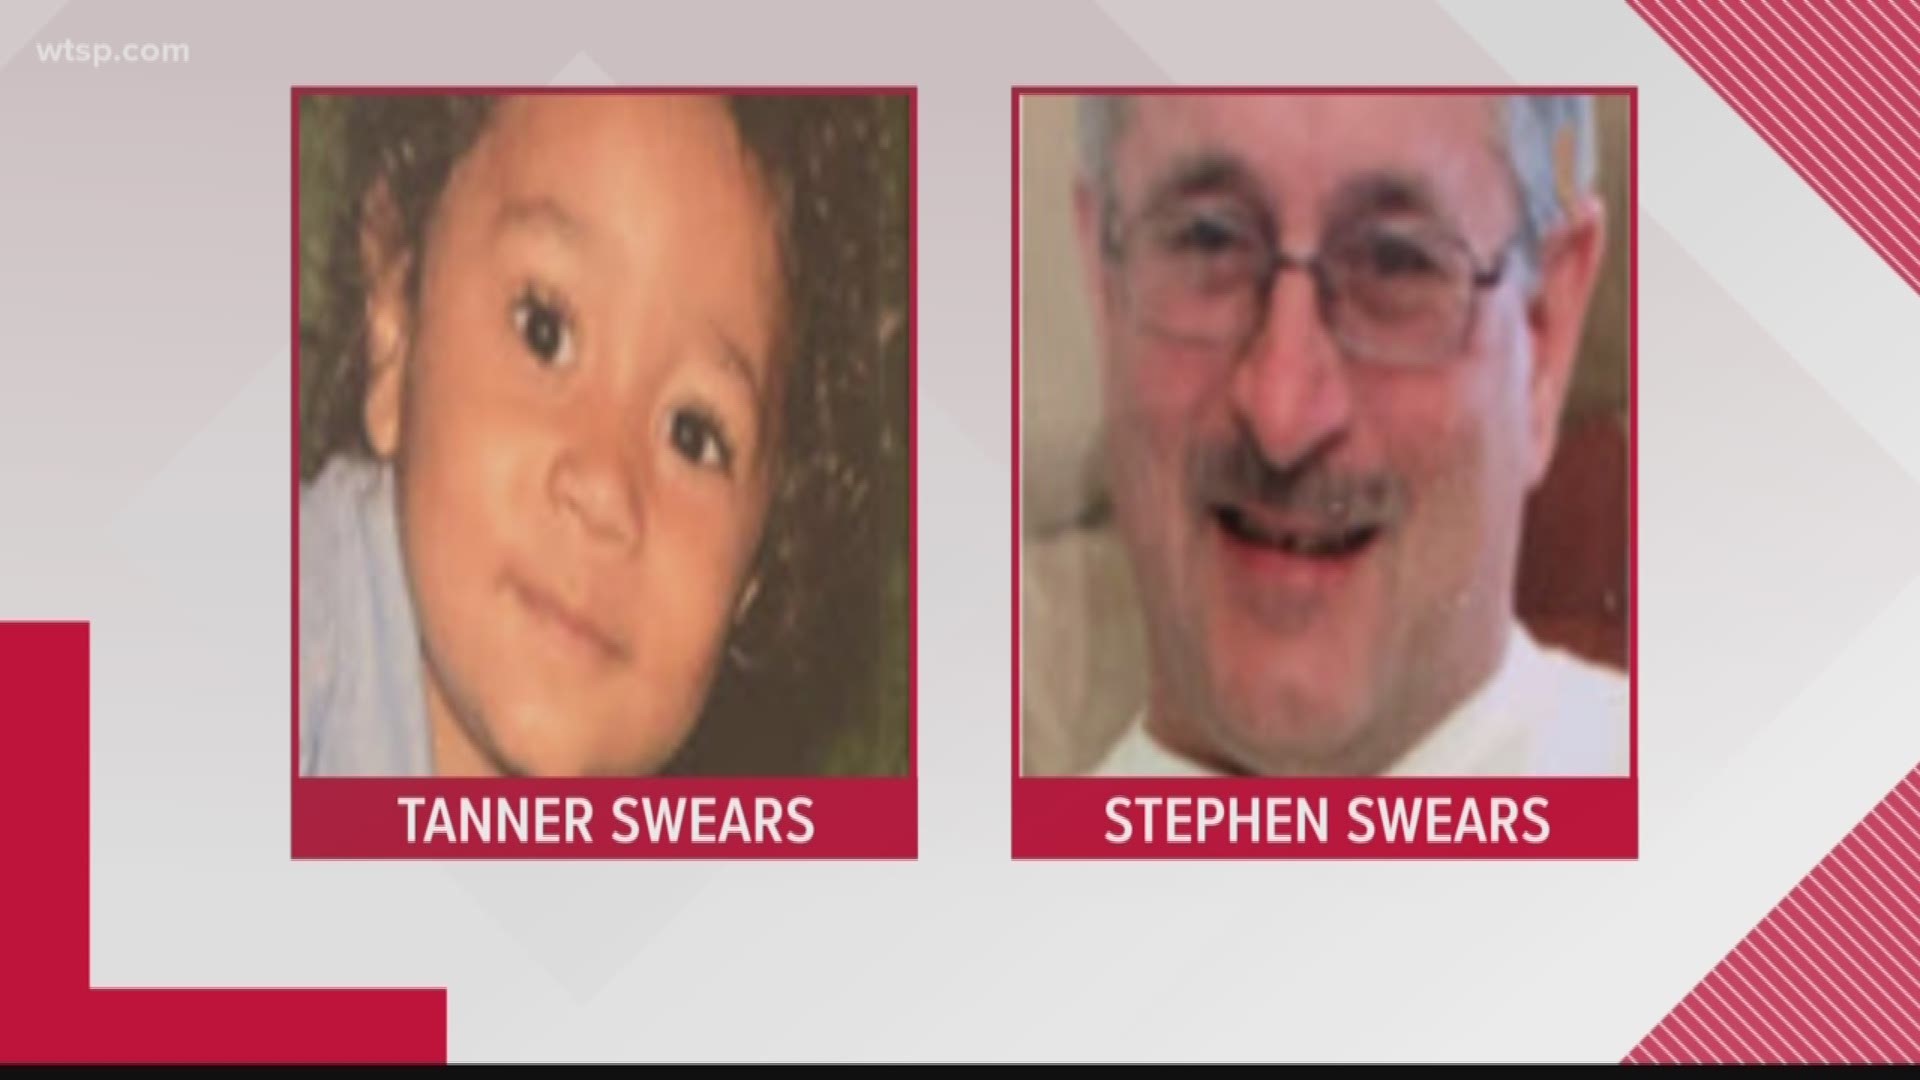 Law enforcement needs people across the state of Florida to keep an eye out for a missing 4-year-old boy.

The Florida Department of Law Enforcement issued a missing child alert for Tanner Swears Saturday.

Tanner is biracial, has black hair, brown eyes, is 41 inches tall and weighs 39 pounds.

He was last seen in a diaper on the 5300 block of Northwest 55th Boulevard in Coconut Creek, Florida.